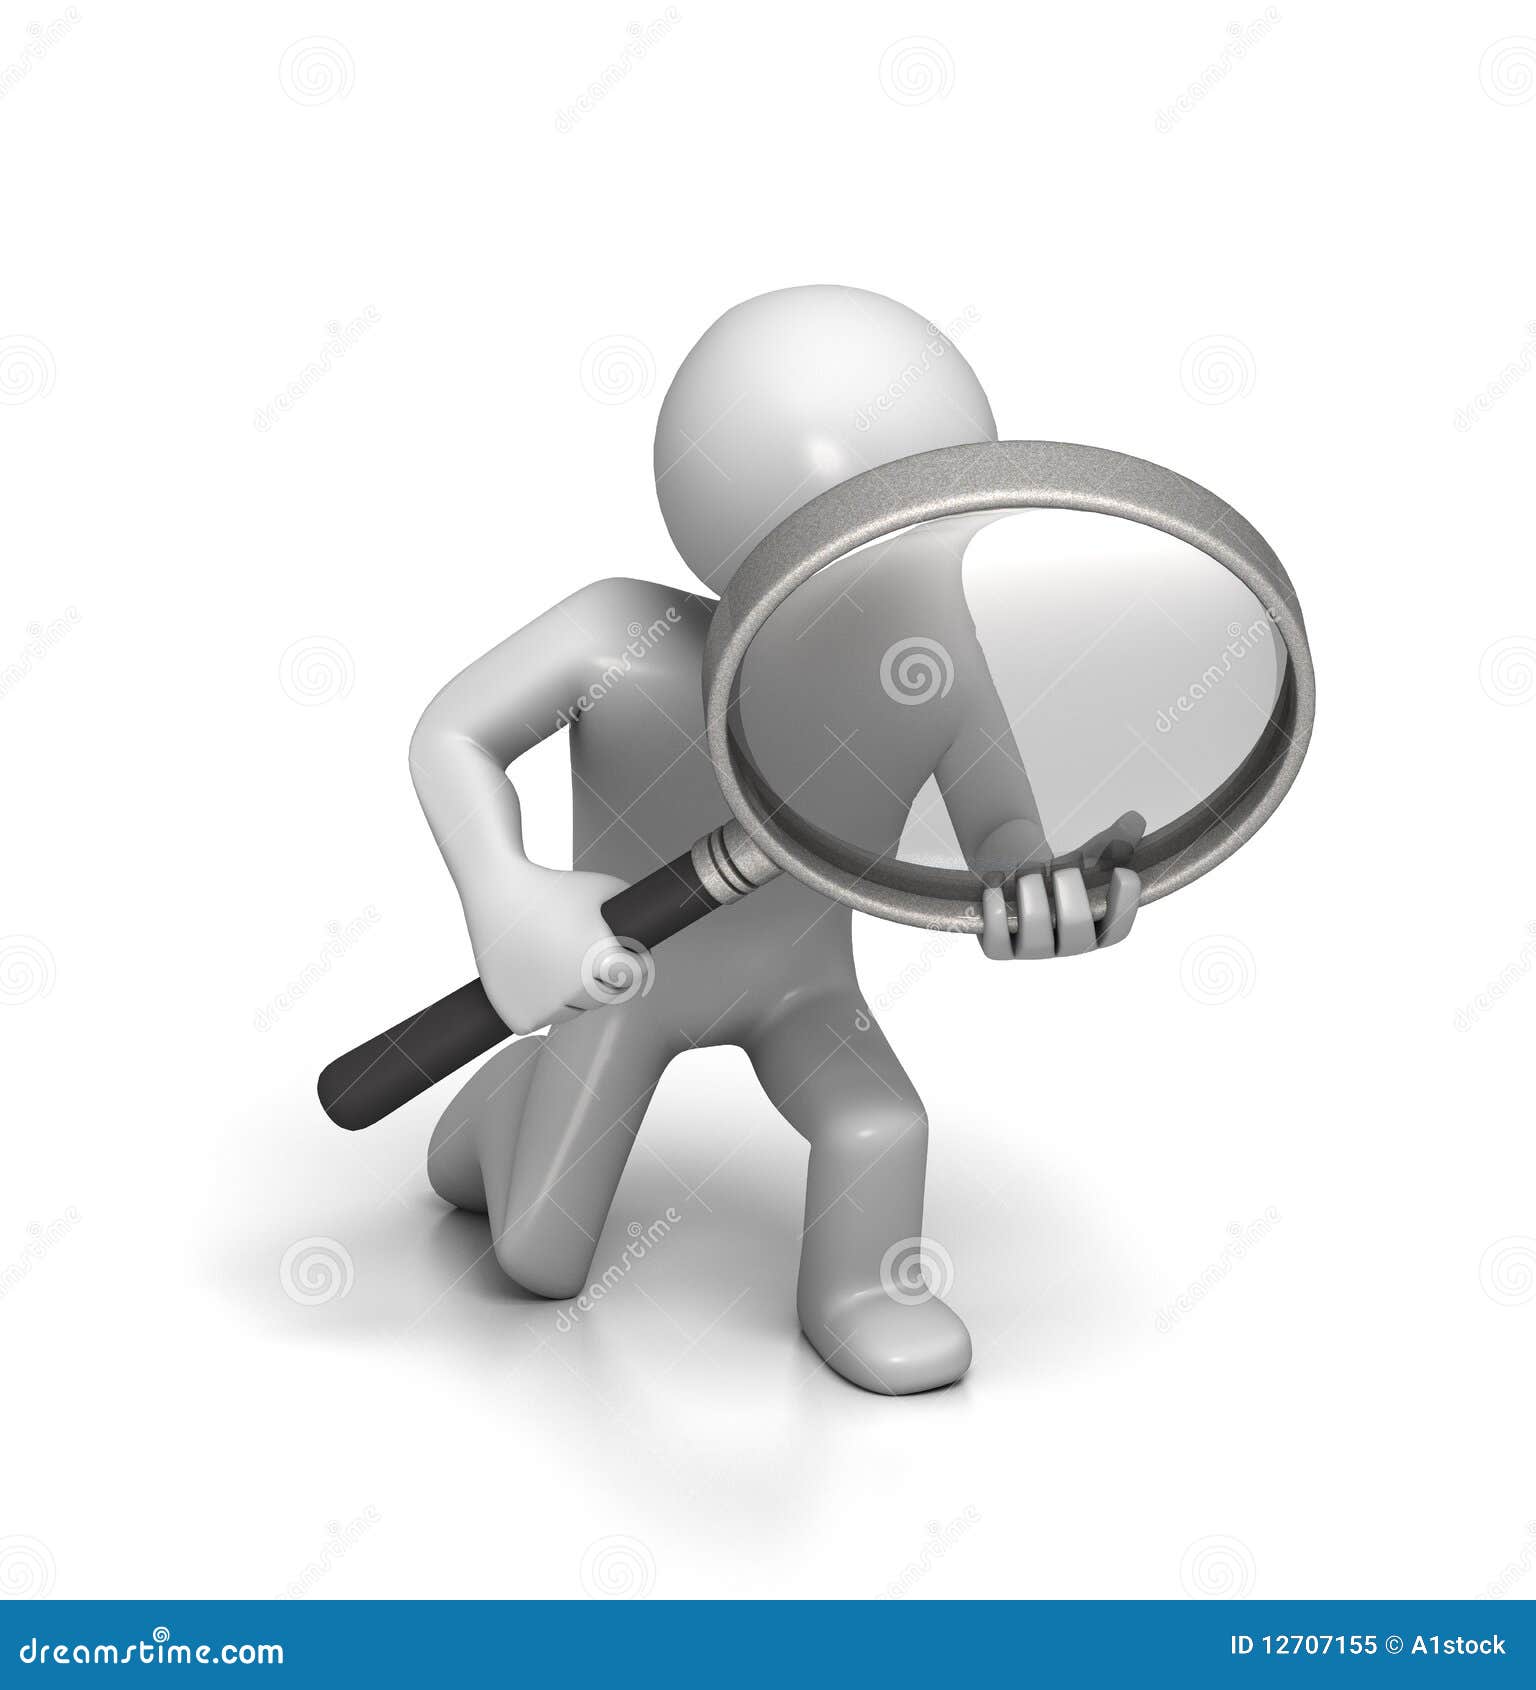 quality inspection clipart - photo #14